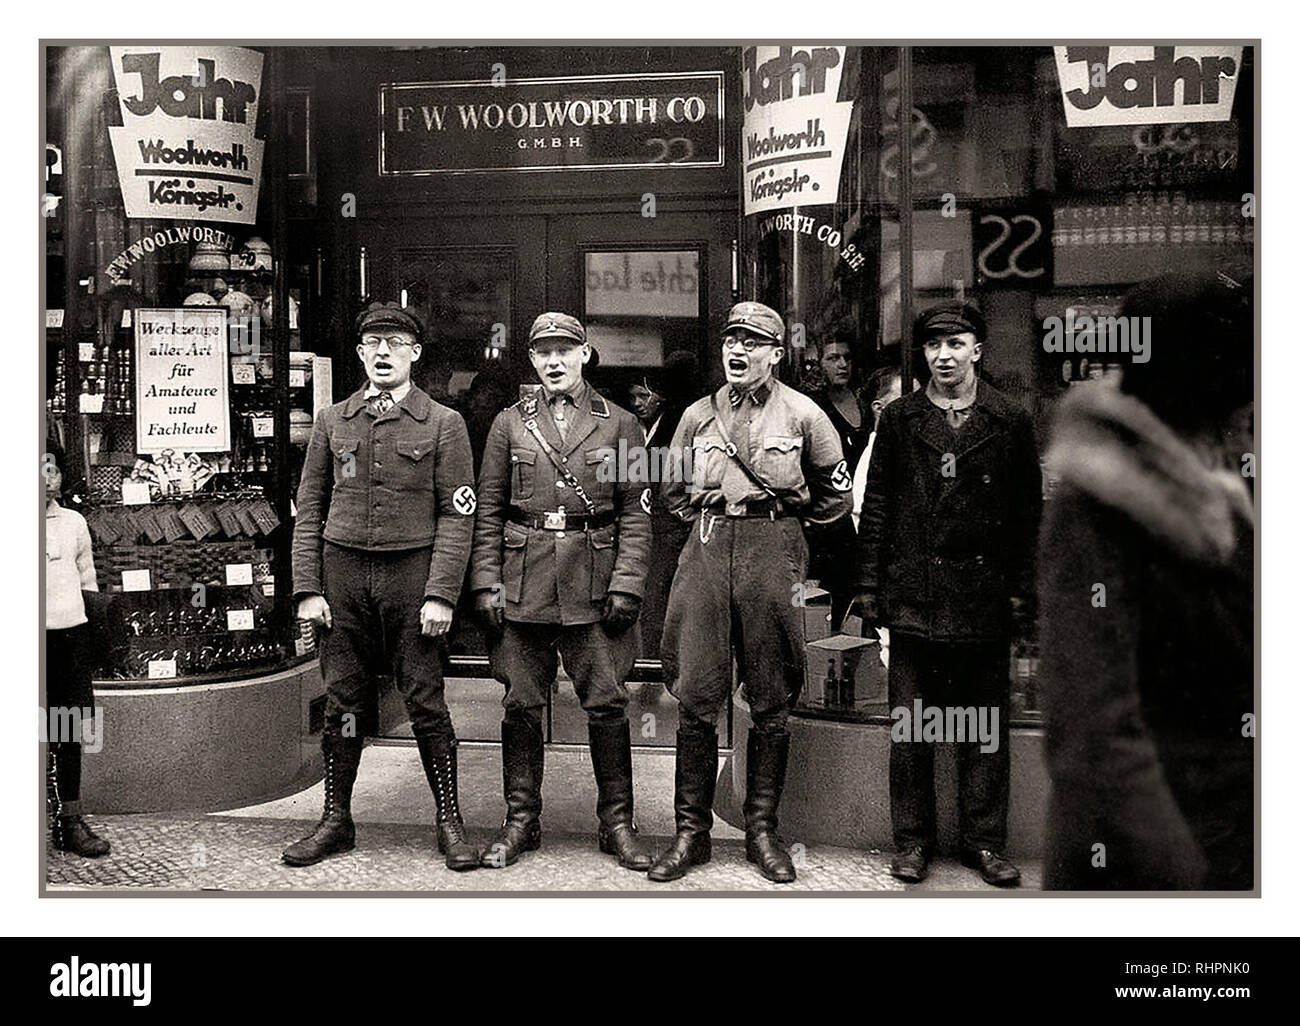 1930’s Shop Store boycott anti-Jewish Nazis and NSDAP Sturmabteilung party members indulge in racist anti Jewish chanting, at entrance to German high street Woolworth store, to promote a boycott of the (allegedly) Jewish-founded Woolworths Germany 1933. Stock Photo